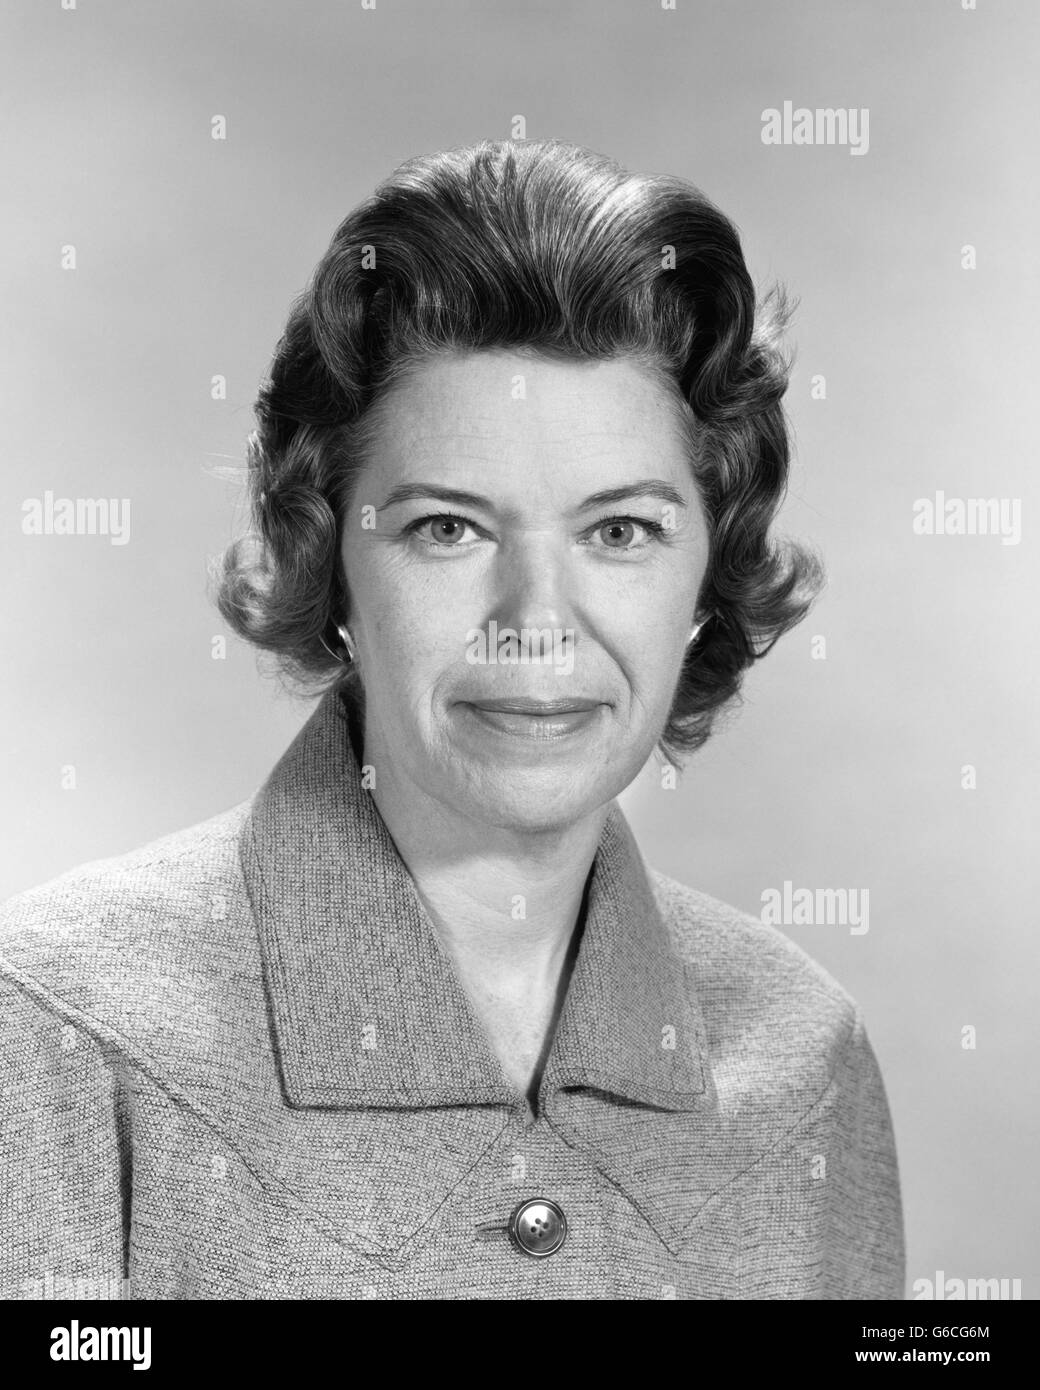 1950 PORTRAIT SMILING WOMAN WEARING COSTUME LAINE COAT LOOKING AT CAMERA Banque D'Images